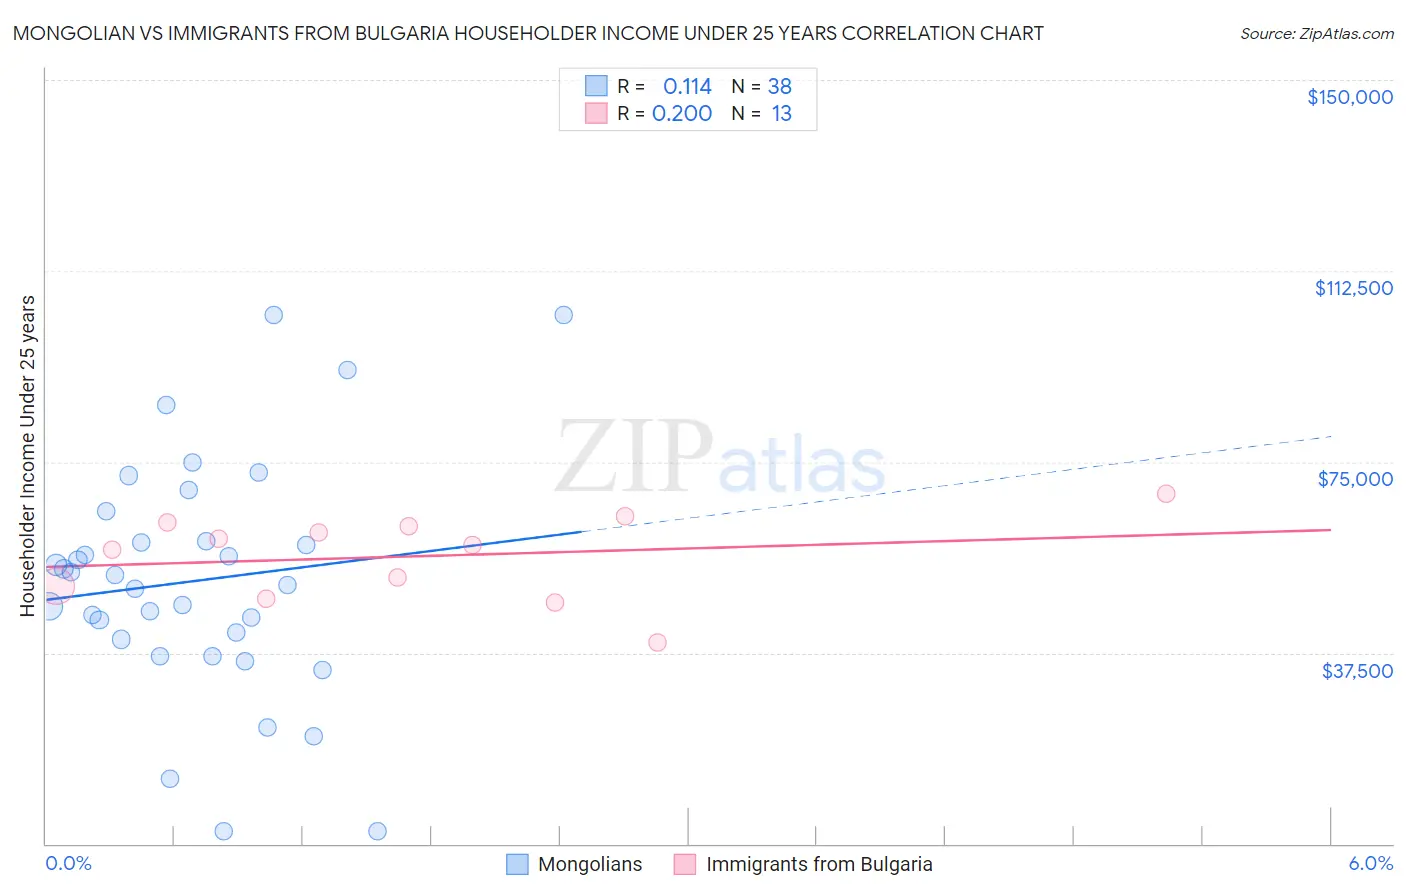 Mongolian vs Immigrants from Bulgaria Householder Income Under 25 years